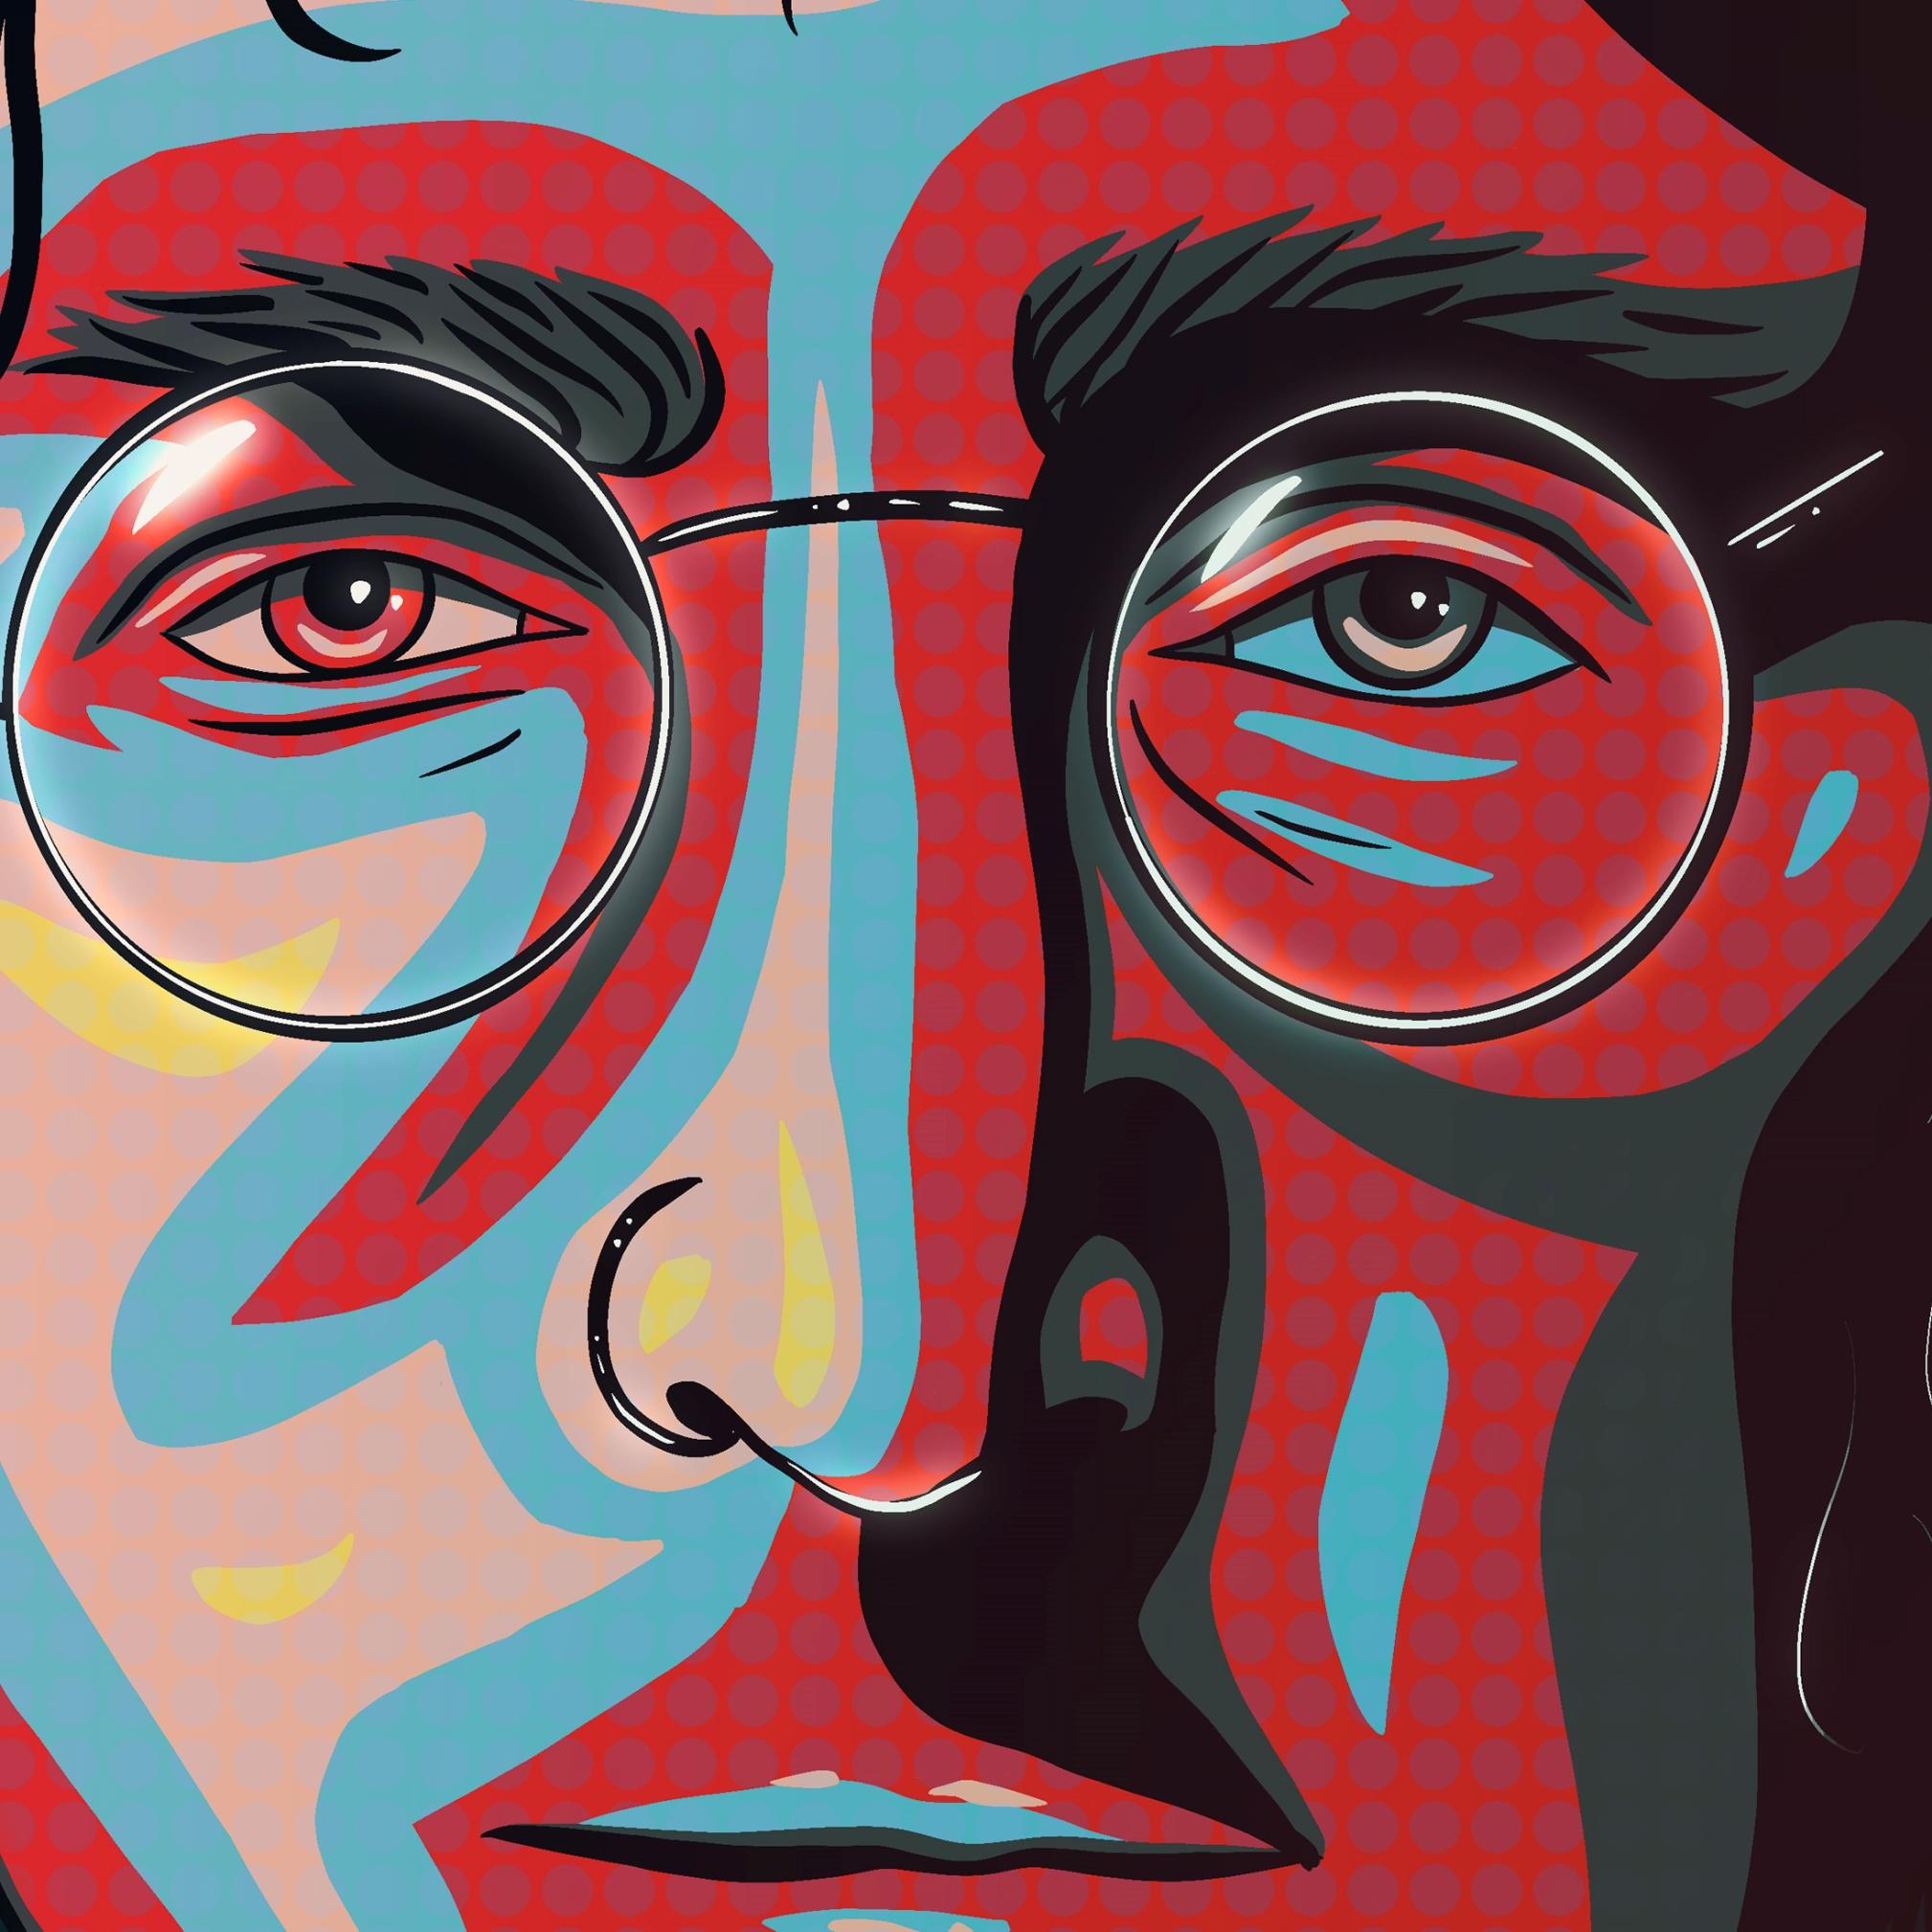 A digital painting in the form of pop art by Lily Bourne of John Lennon from the 1960s. Red, yellow, blue and black in colour.